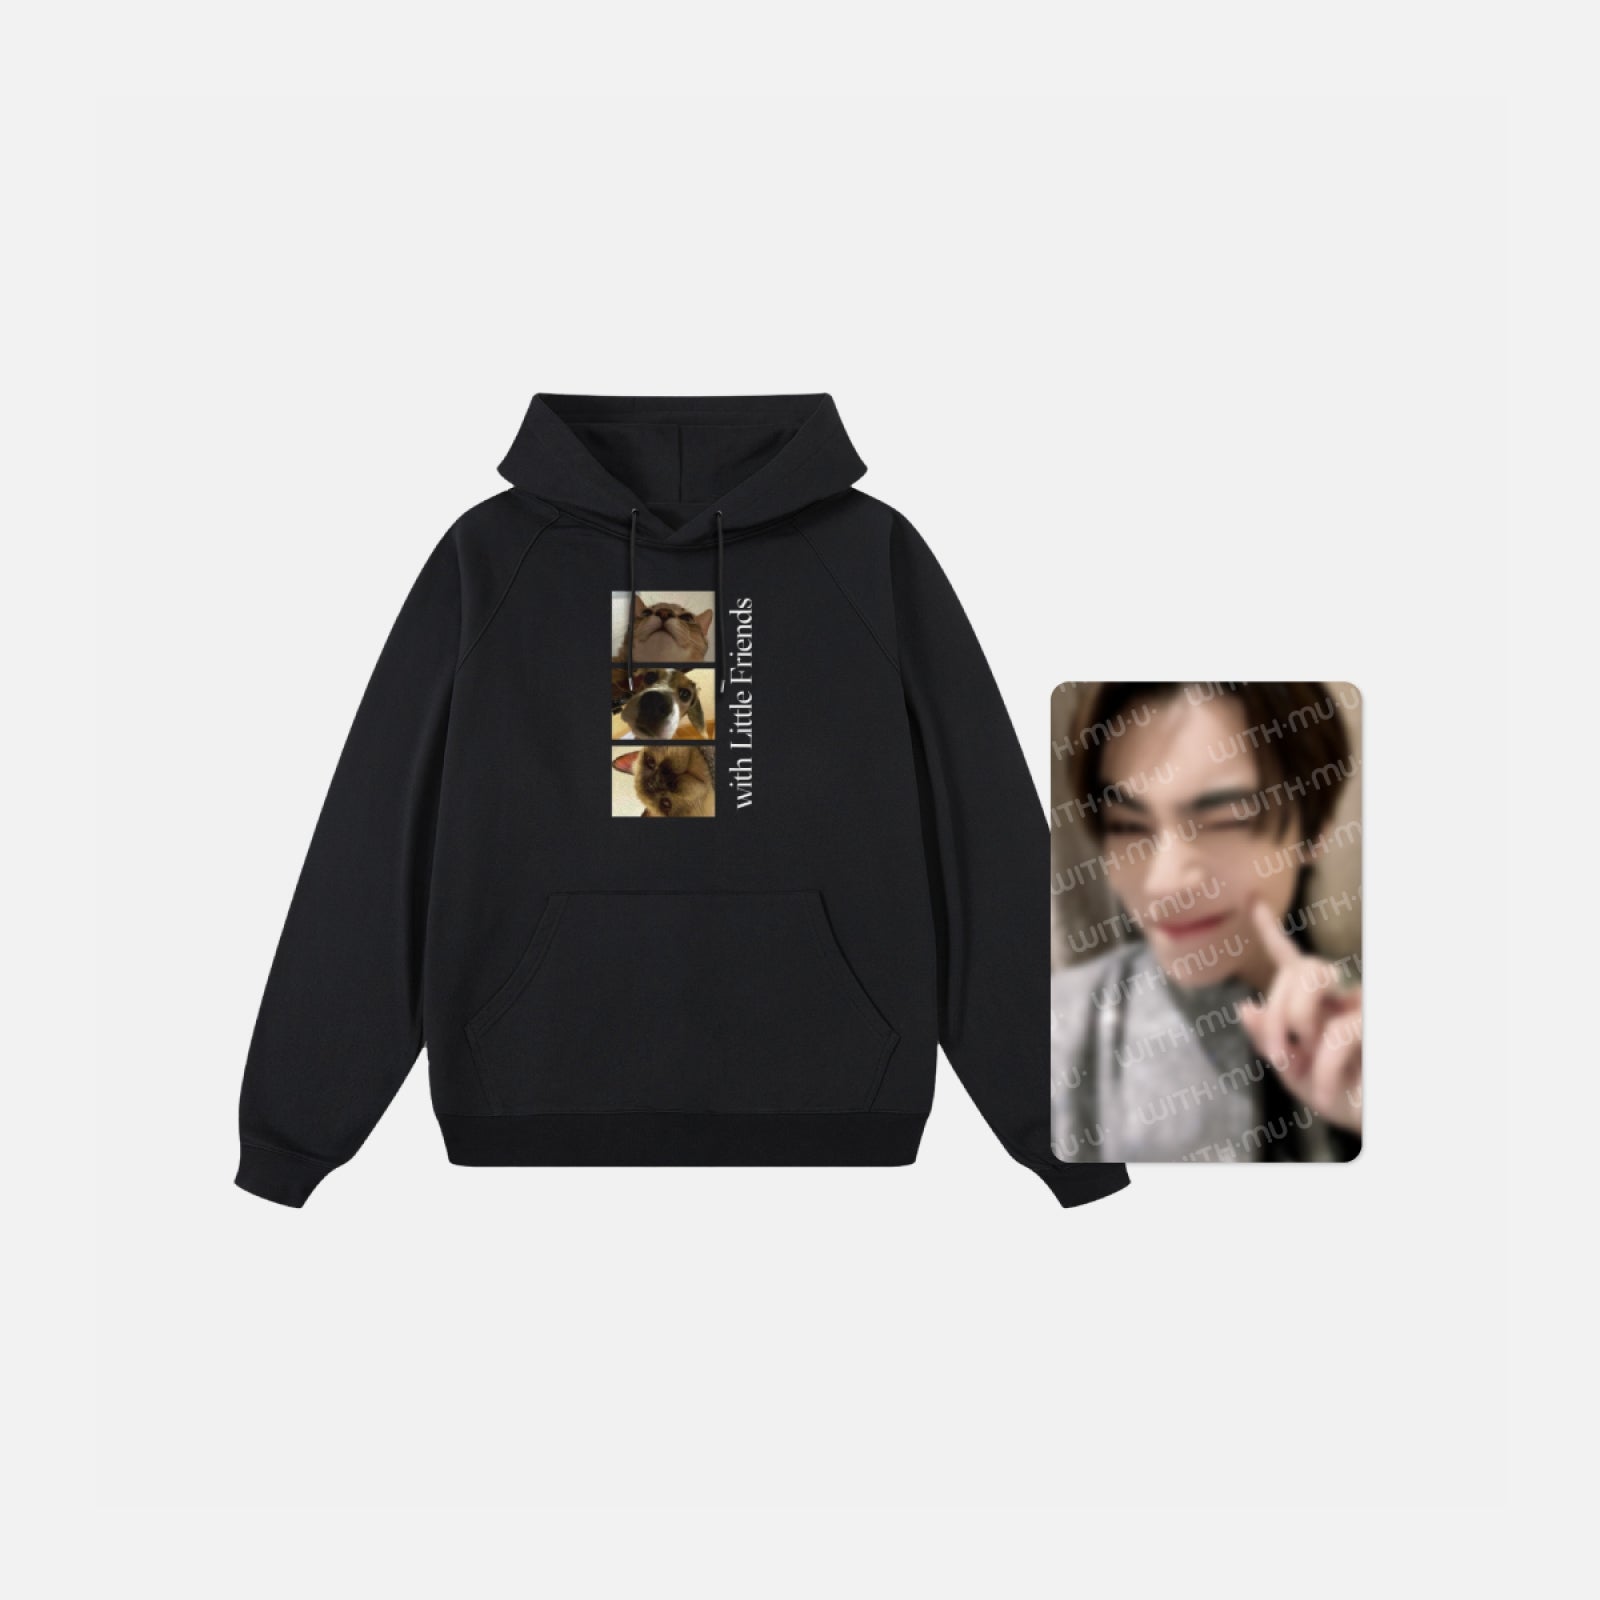 WAYV 5TH ANNIVERSARY OFFICIAL MD - 05. LITTLE FRIENDS HOODIE SET